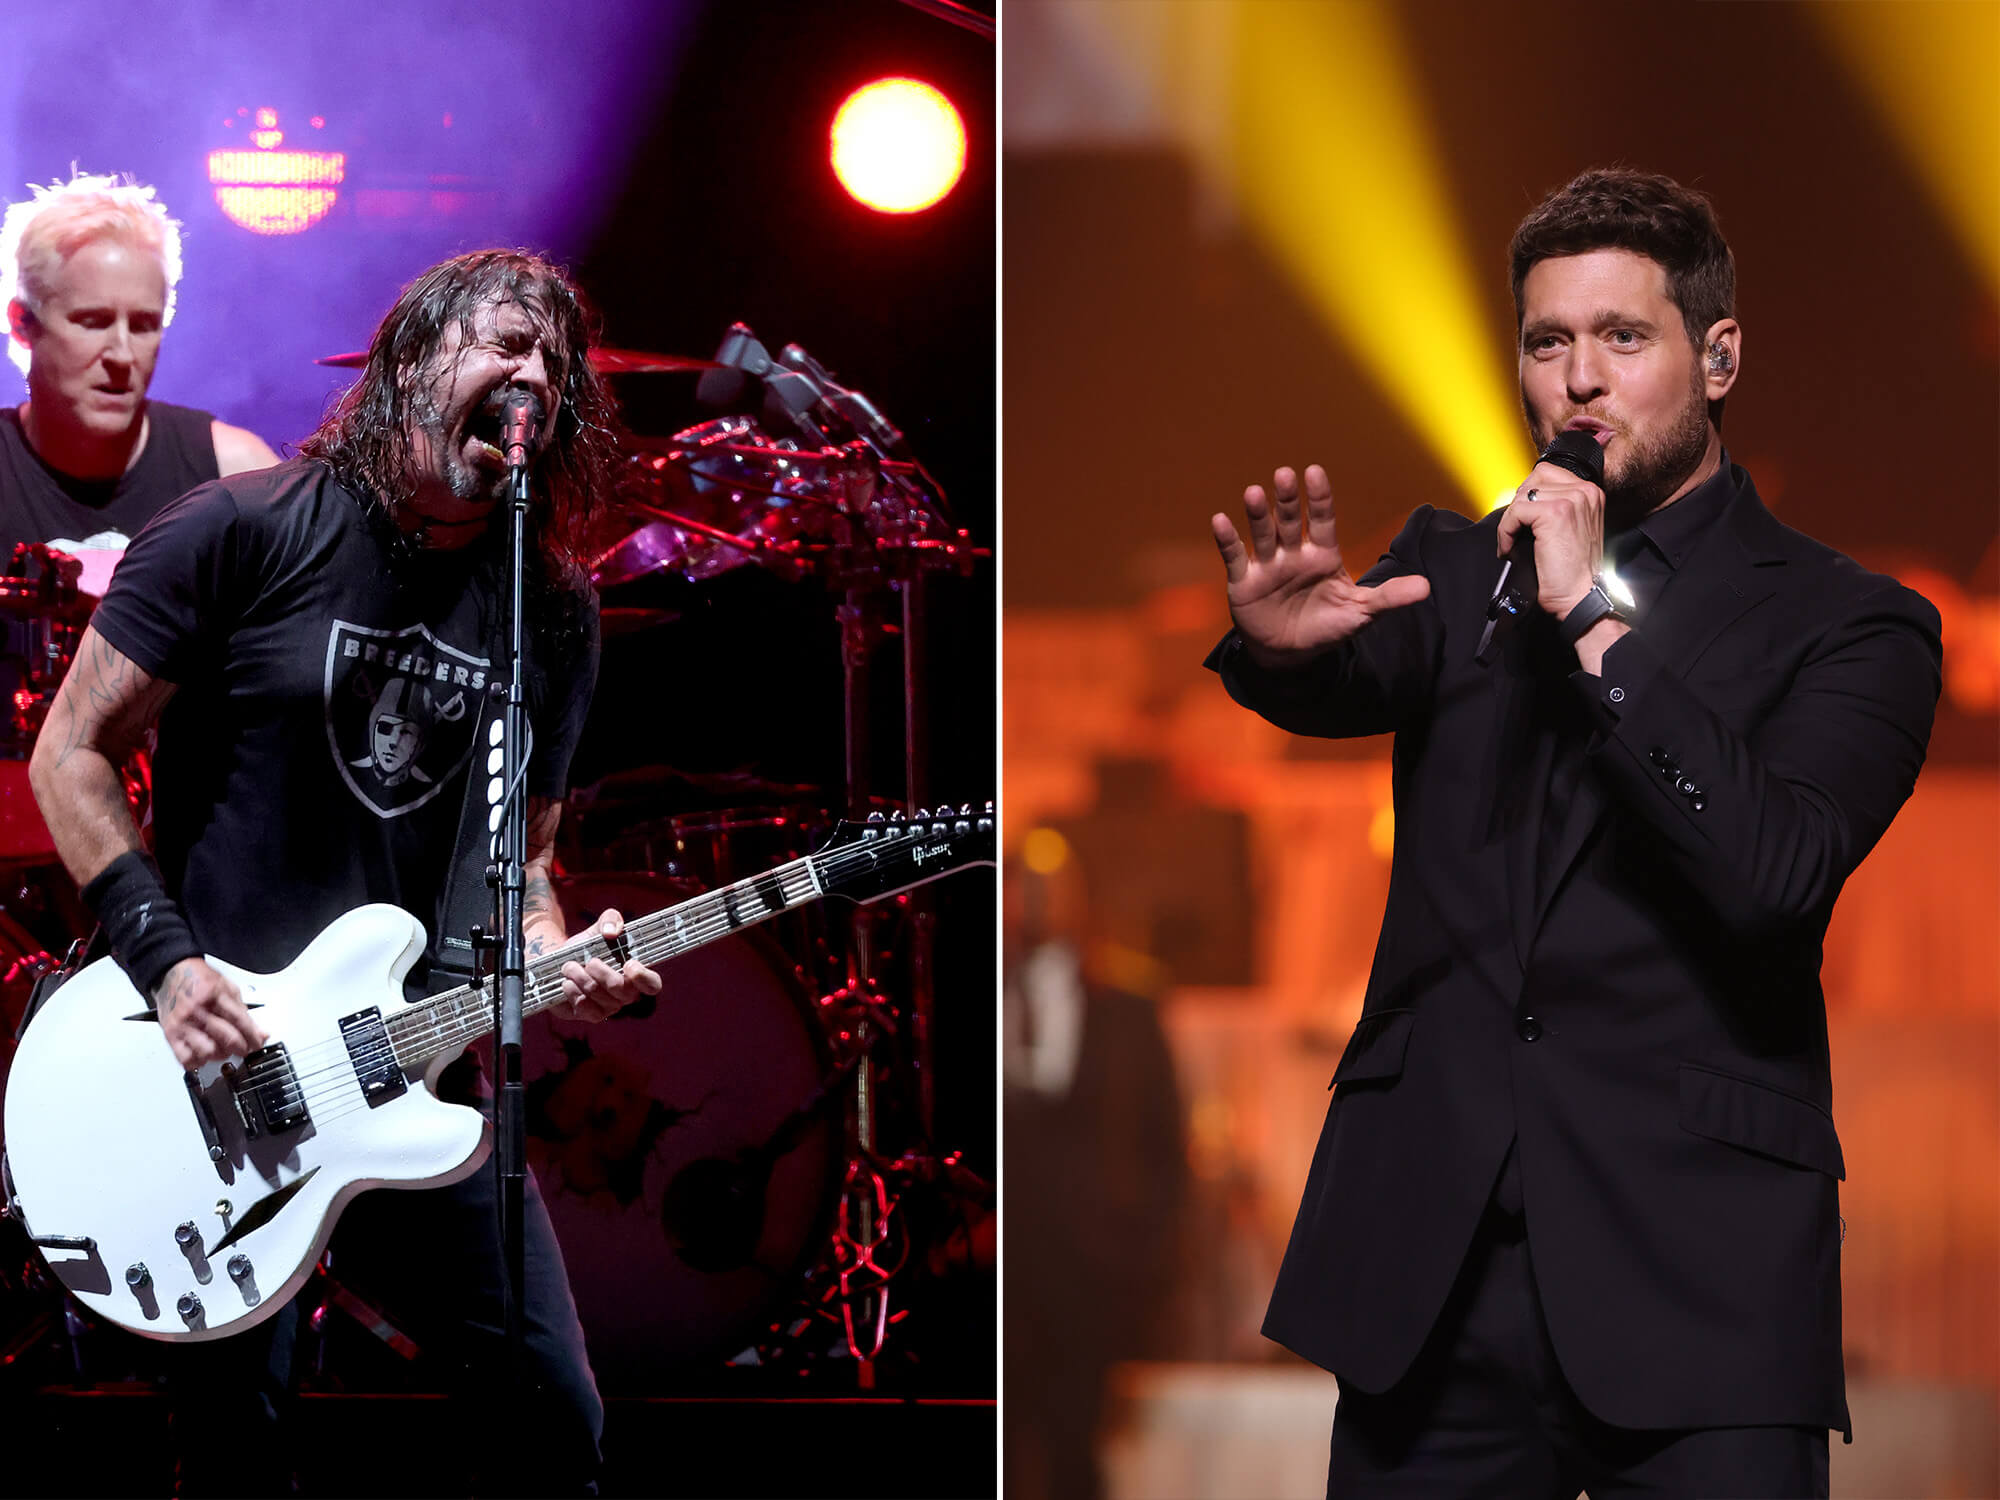 dave-grohl-michael-buble@2000x1500